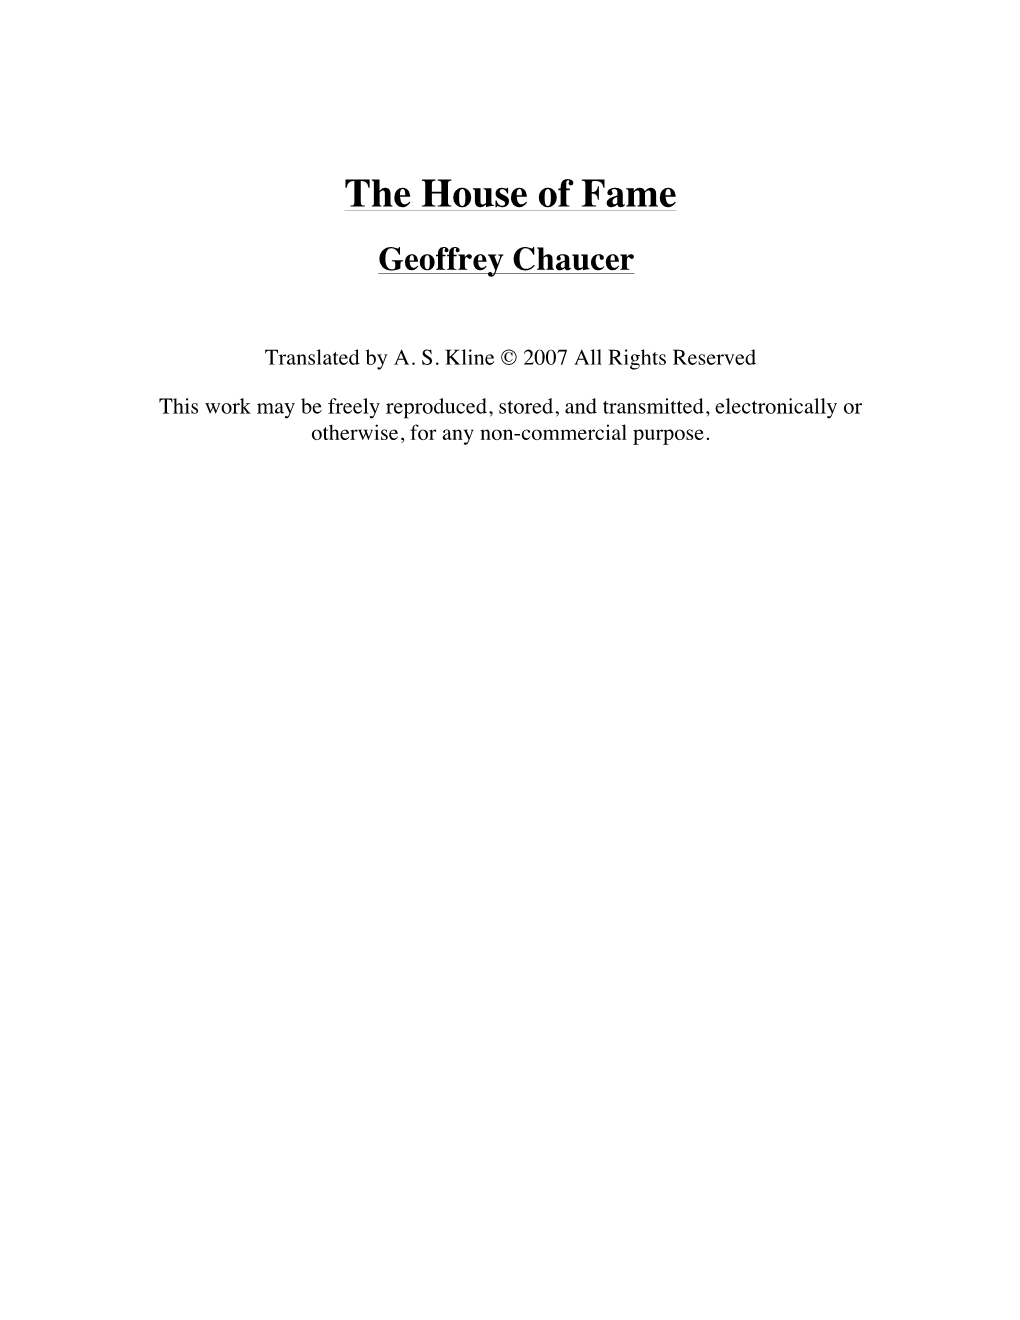 The House of Fame Geoffrey Chaucer